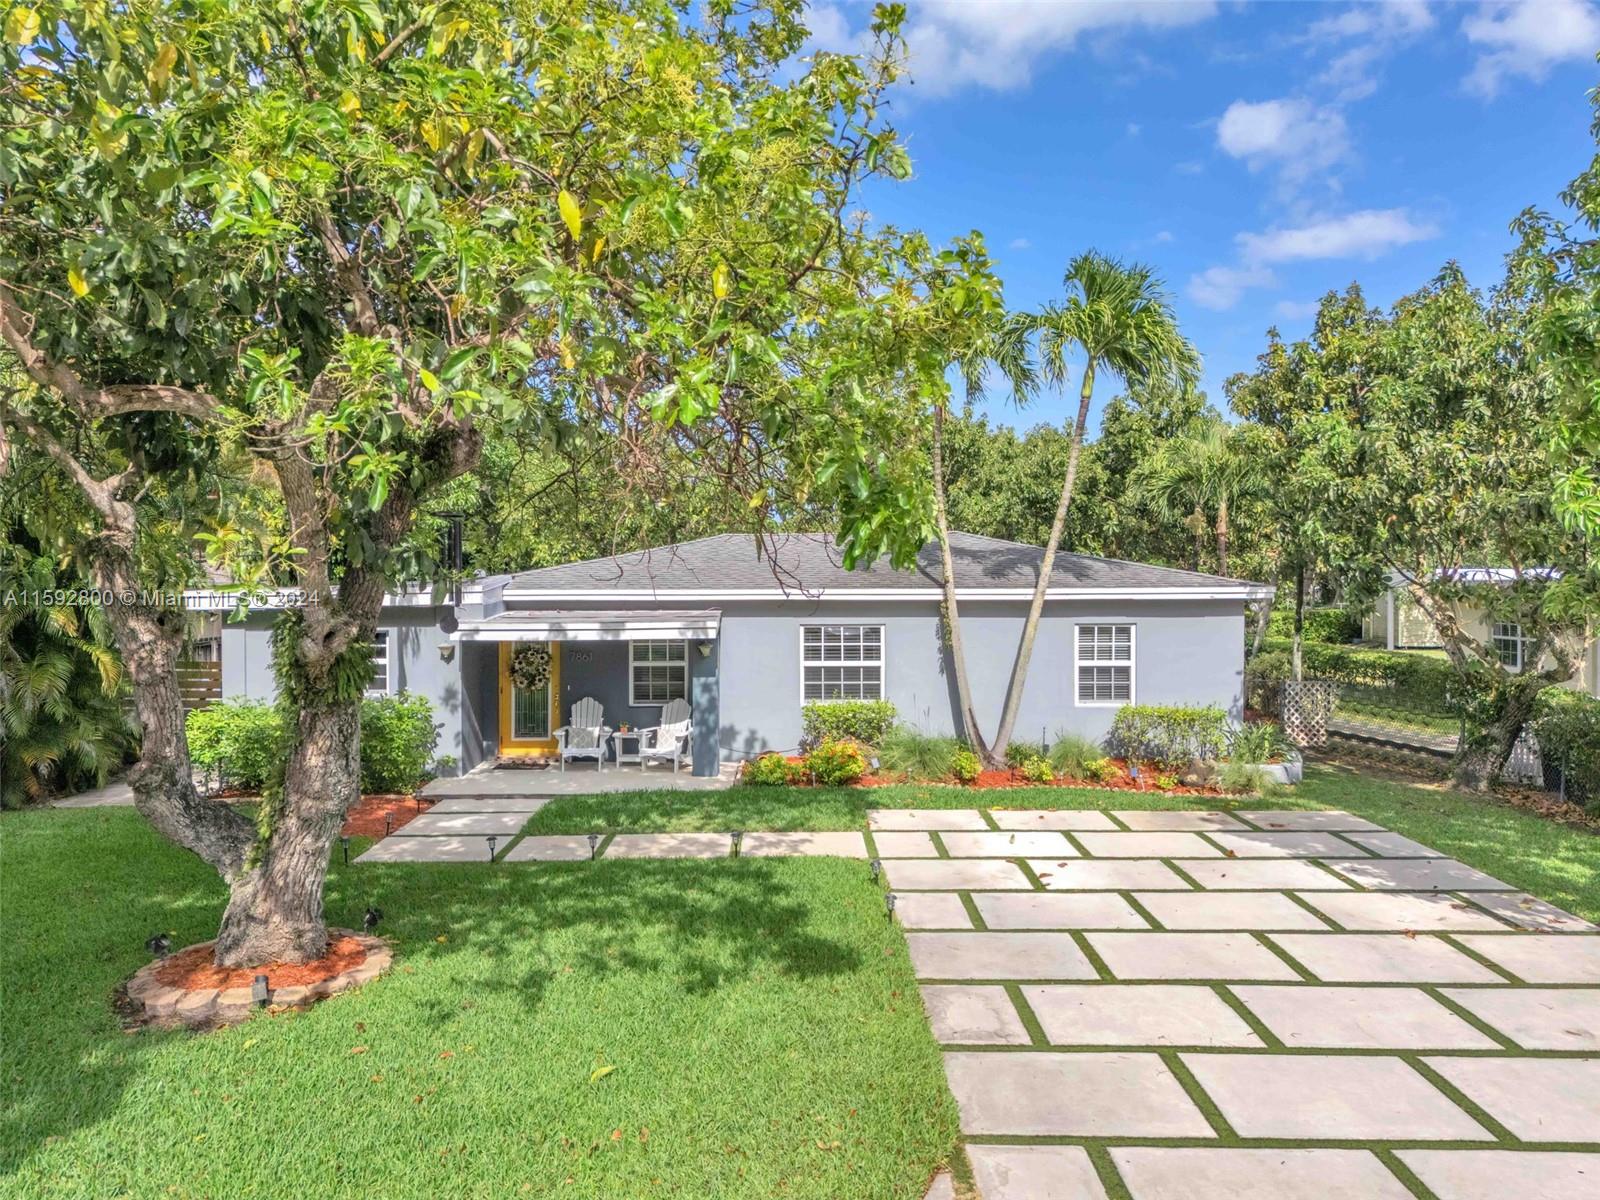 This charming and spacious 4-bedroom, 3-bathroom home is located in the heart of South Miami. Positioned on a plentiful 10,725 sqft lot with a pool and is surrounded by beautiful landscaping including abundant avocado trees. The backyard feels like a private outdoor oasis set up to entertain or just enjoy the peace of your home. The impact windows and doors allow an abundance of natural light to reflect throughout the home. The master bathroom was curated to feel like a spa within your own home. New tankless water heater (22), sprinkler system (22), and AC (18). This home is in a prime location and close proximity to US-1, Sunset Place, Dadeland Mall, the Palmetto Expressway and "A" rated schools.